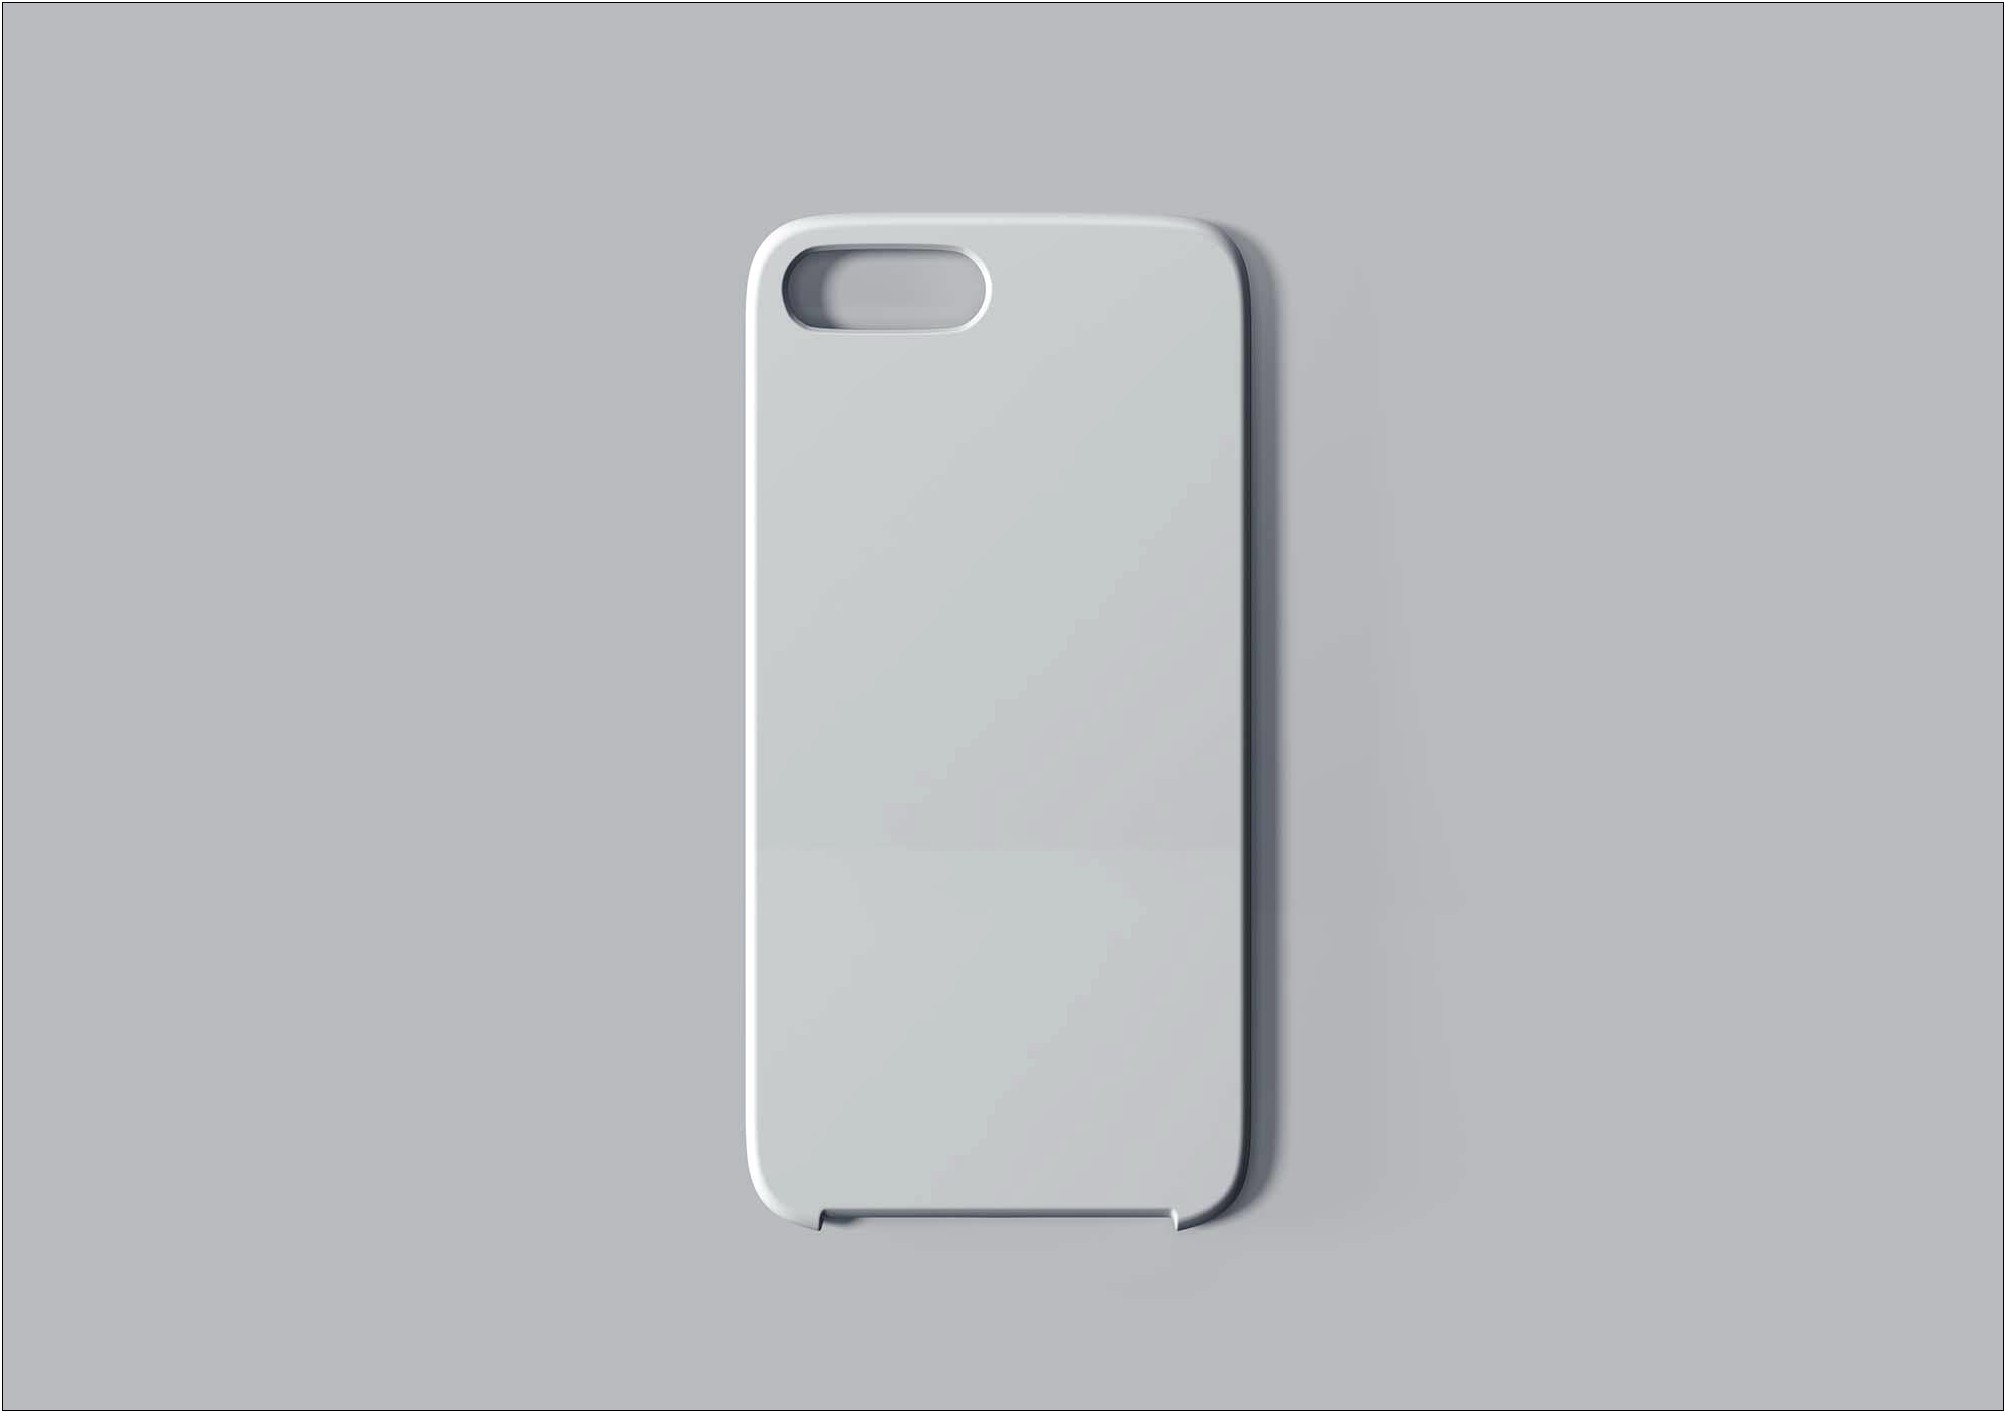 Phone Case Template Psd Free Download